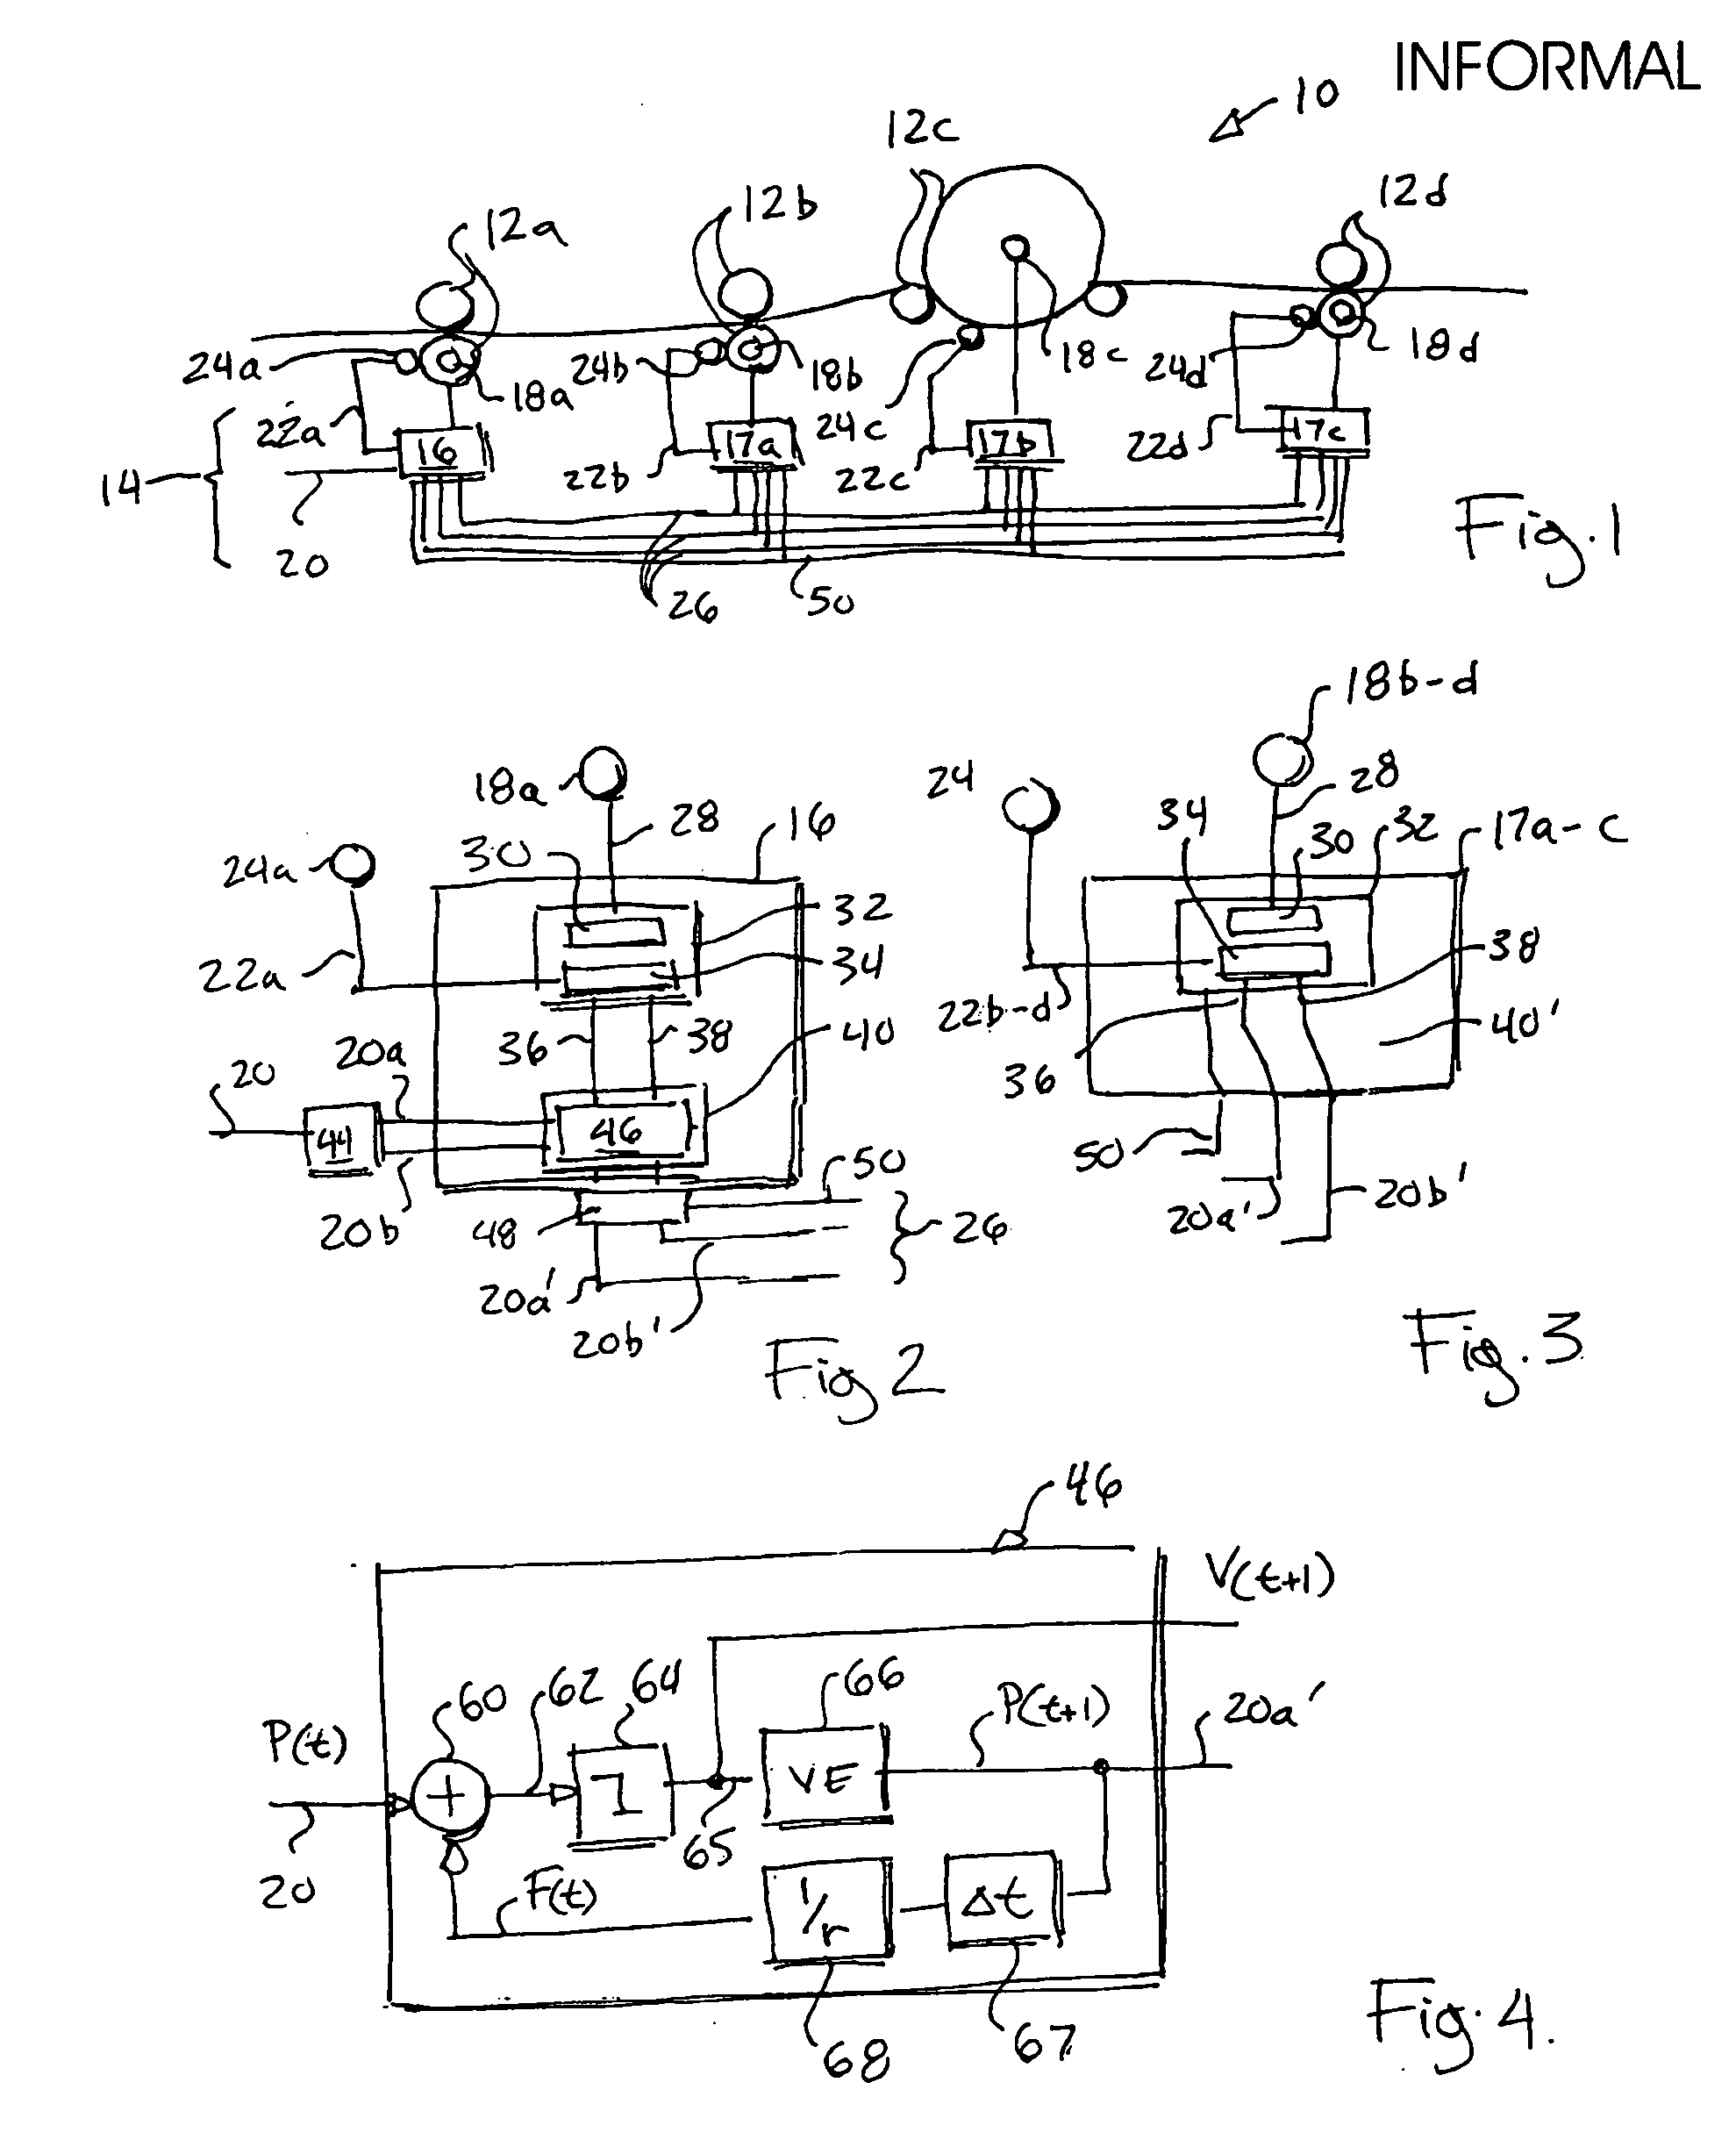 Electronic line shaft with phased lock loop filtering and predicting